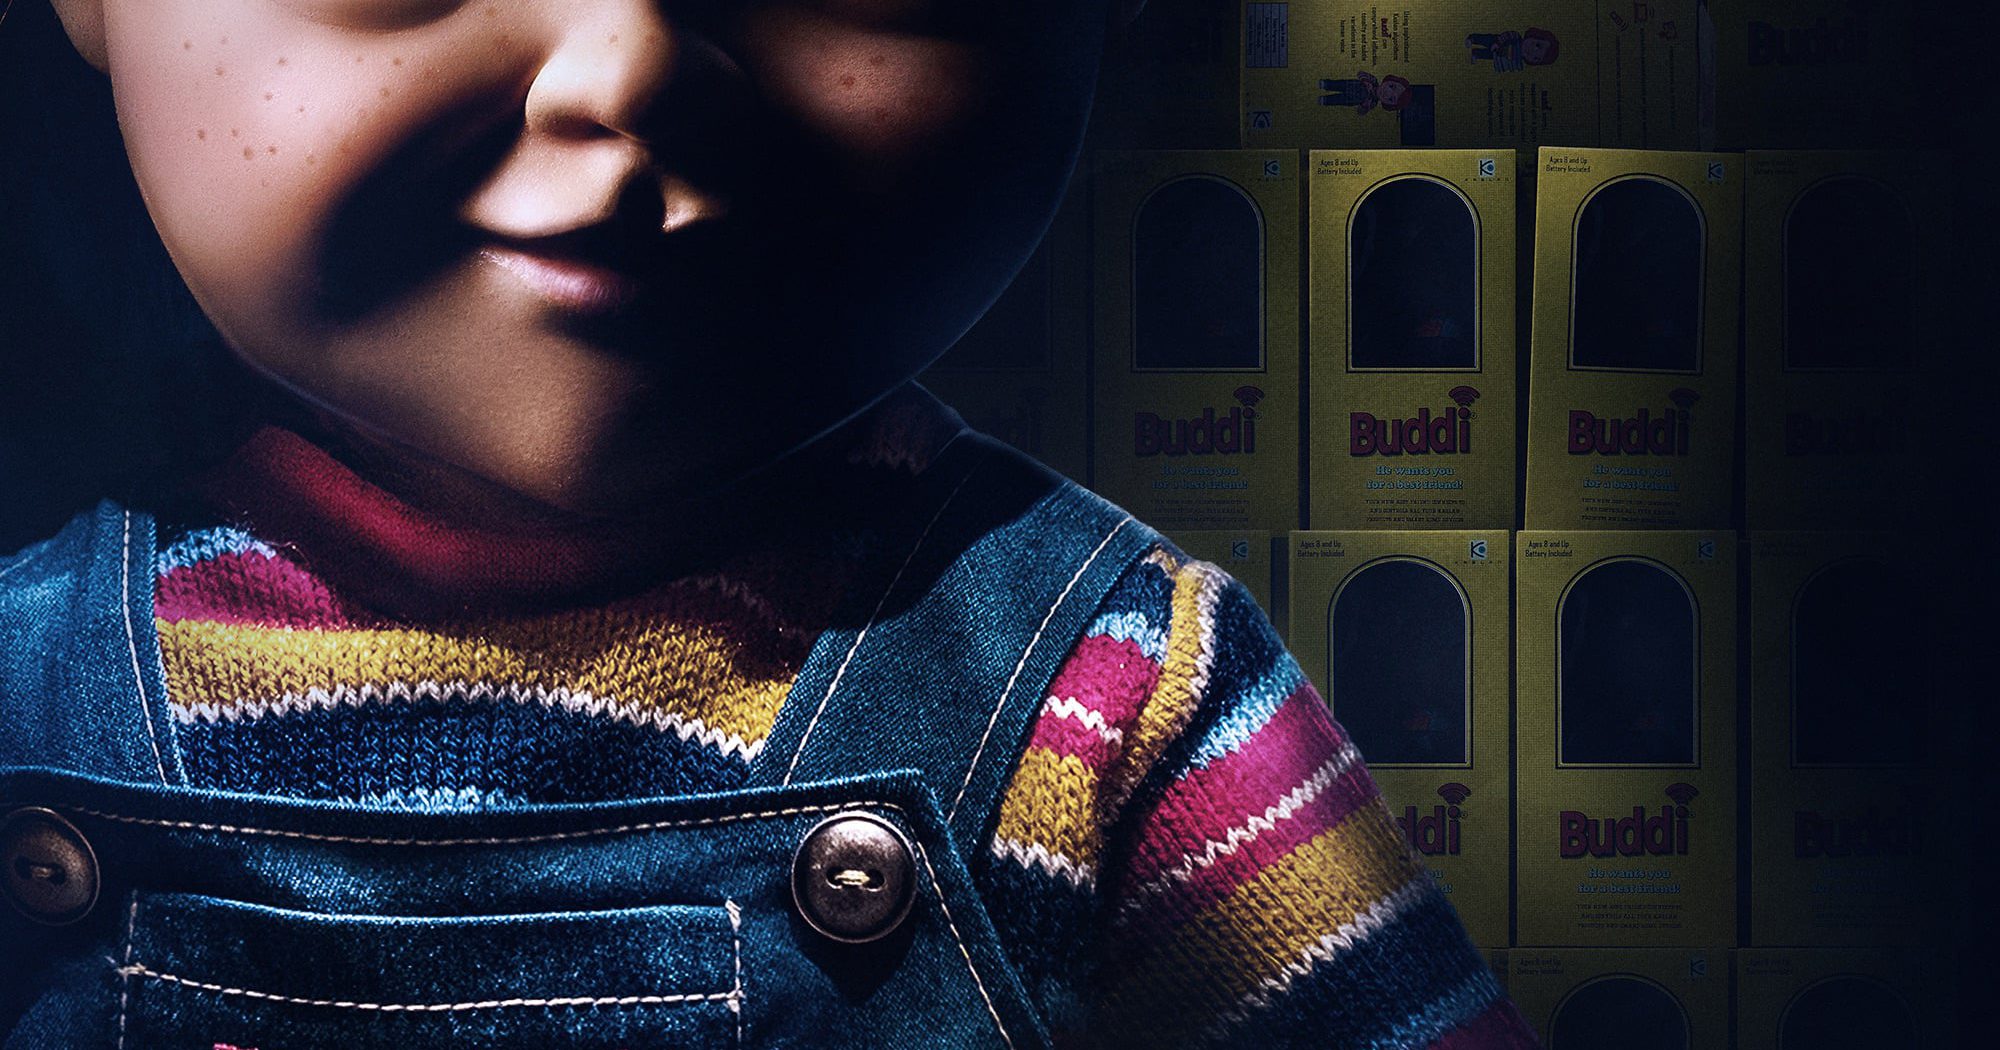 Poster for the movie "Child's Play"